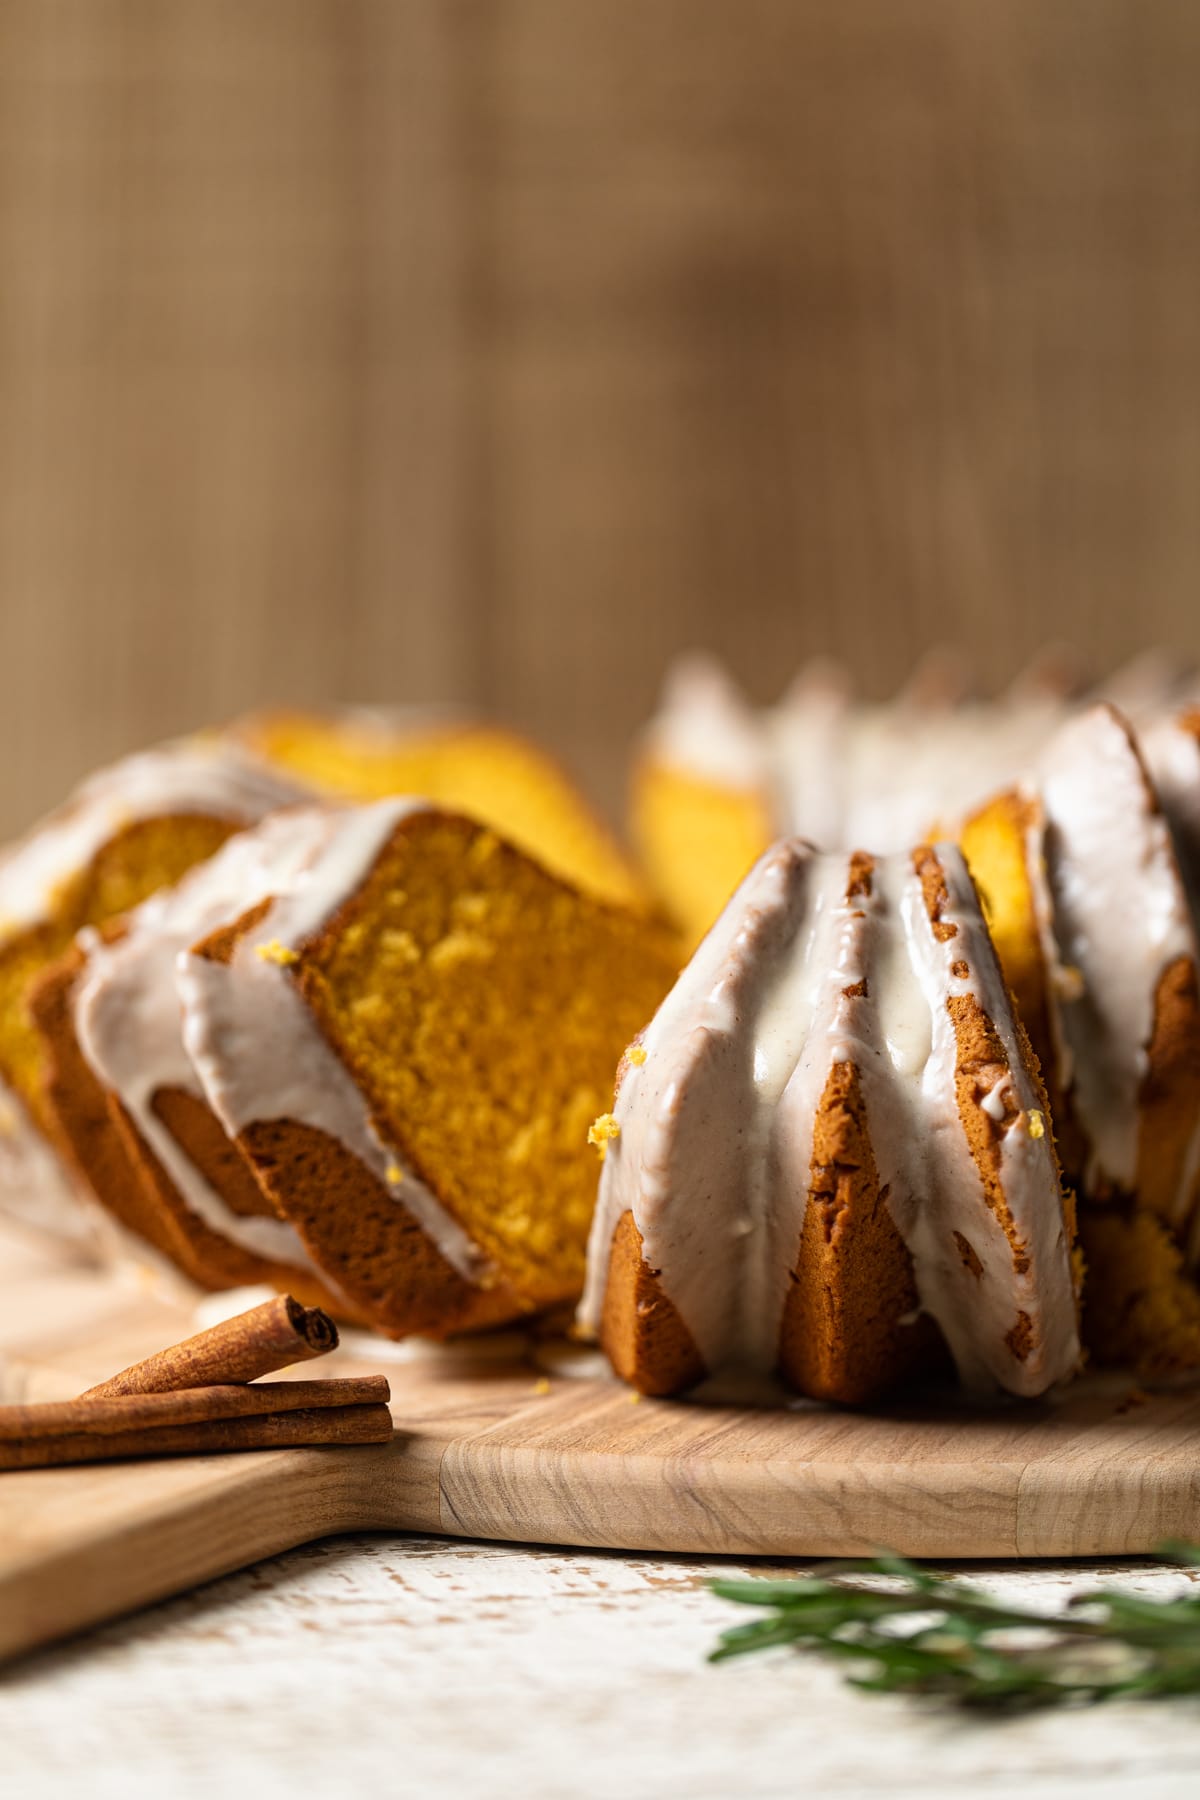 Slices of Sweet Potato Bundt Cake with Maple Glaze on a wooden board